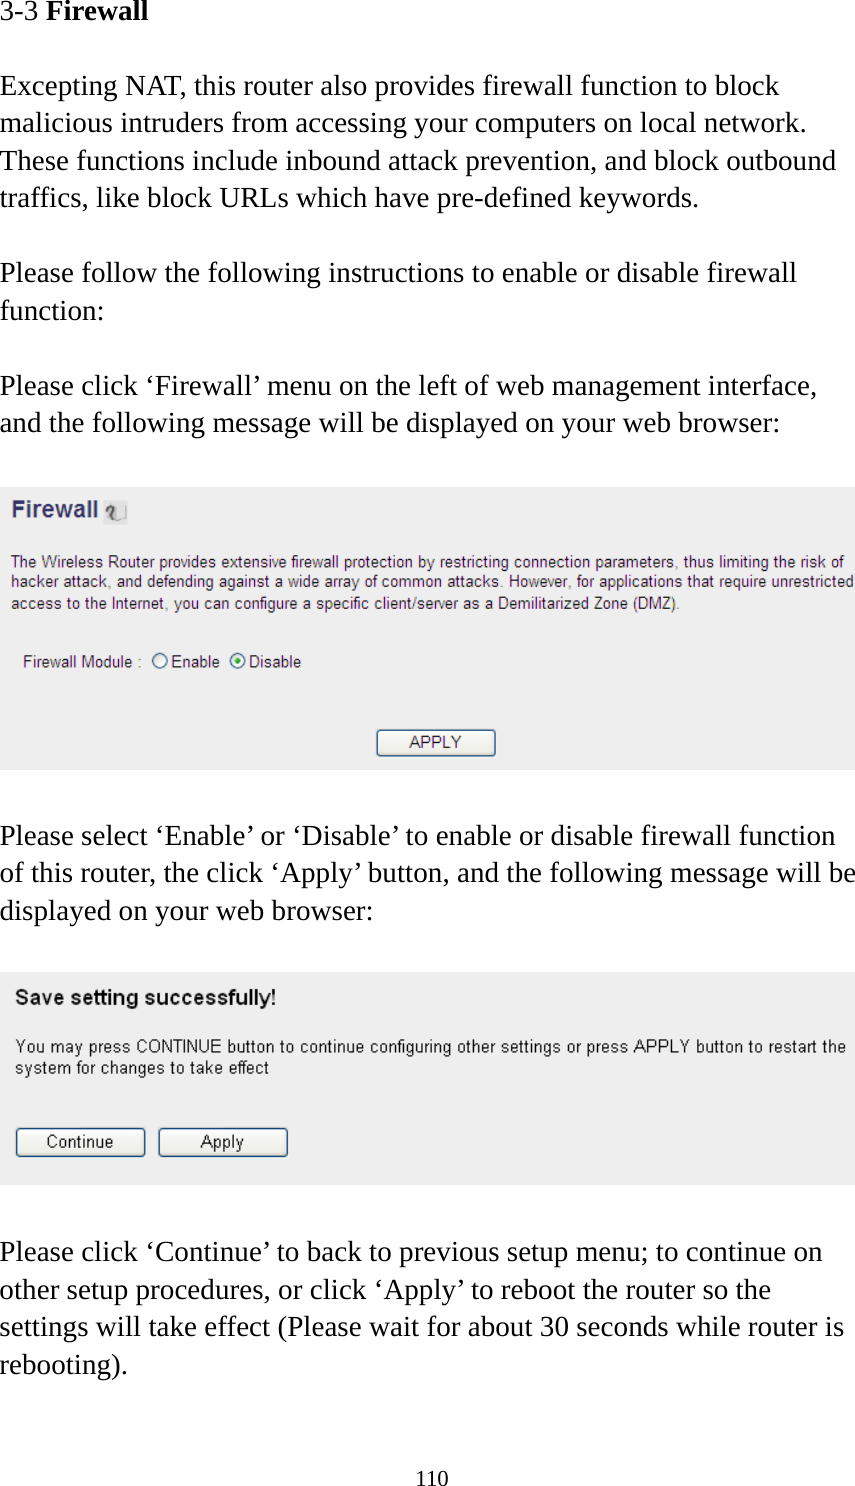 110 3-3 Firewall  Excepting NAT, this router also provides firewall function to block malicious intruders from accessing your computers on local network. These functions include inbound attack prevention, and block outbound traffics, like block URLs which have pre-defined keywords.  Please follow the following instructions to enable or disable firewall function:  Please click ‘Firewall’ menu on the left of web management interface, and the following message will be displayed on your web browser:    Please select ‘Enable’ or ‘Disable’ to enable or disable firewall function of this router, the click ‘Apply’ button, and the following message will be displayed on your web browser:    Please click ‘Continue’ to back to previous setup menu; to continue on other setup procedures, or click ‘Apply’ to reboot the router so the settings will take effect (Please wait for about 30 seconds while router is rebooting).  